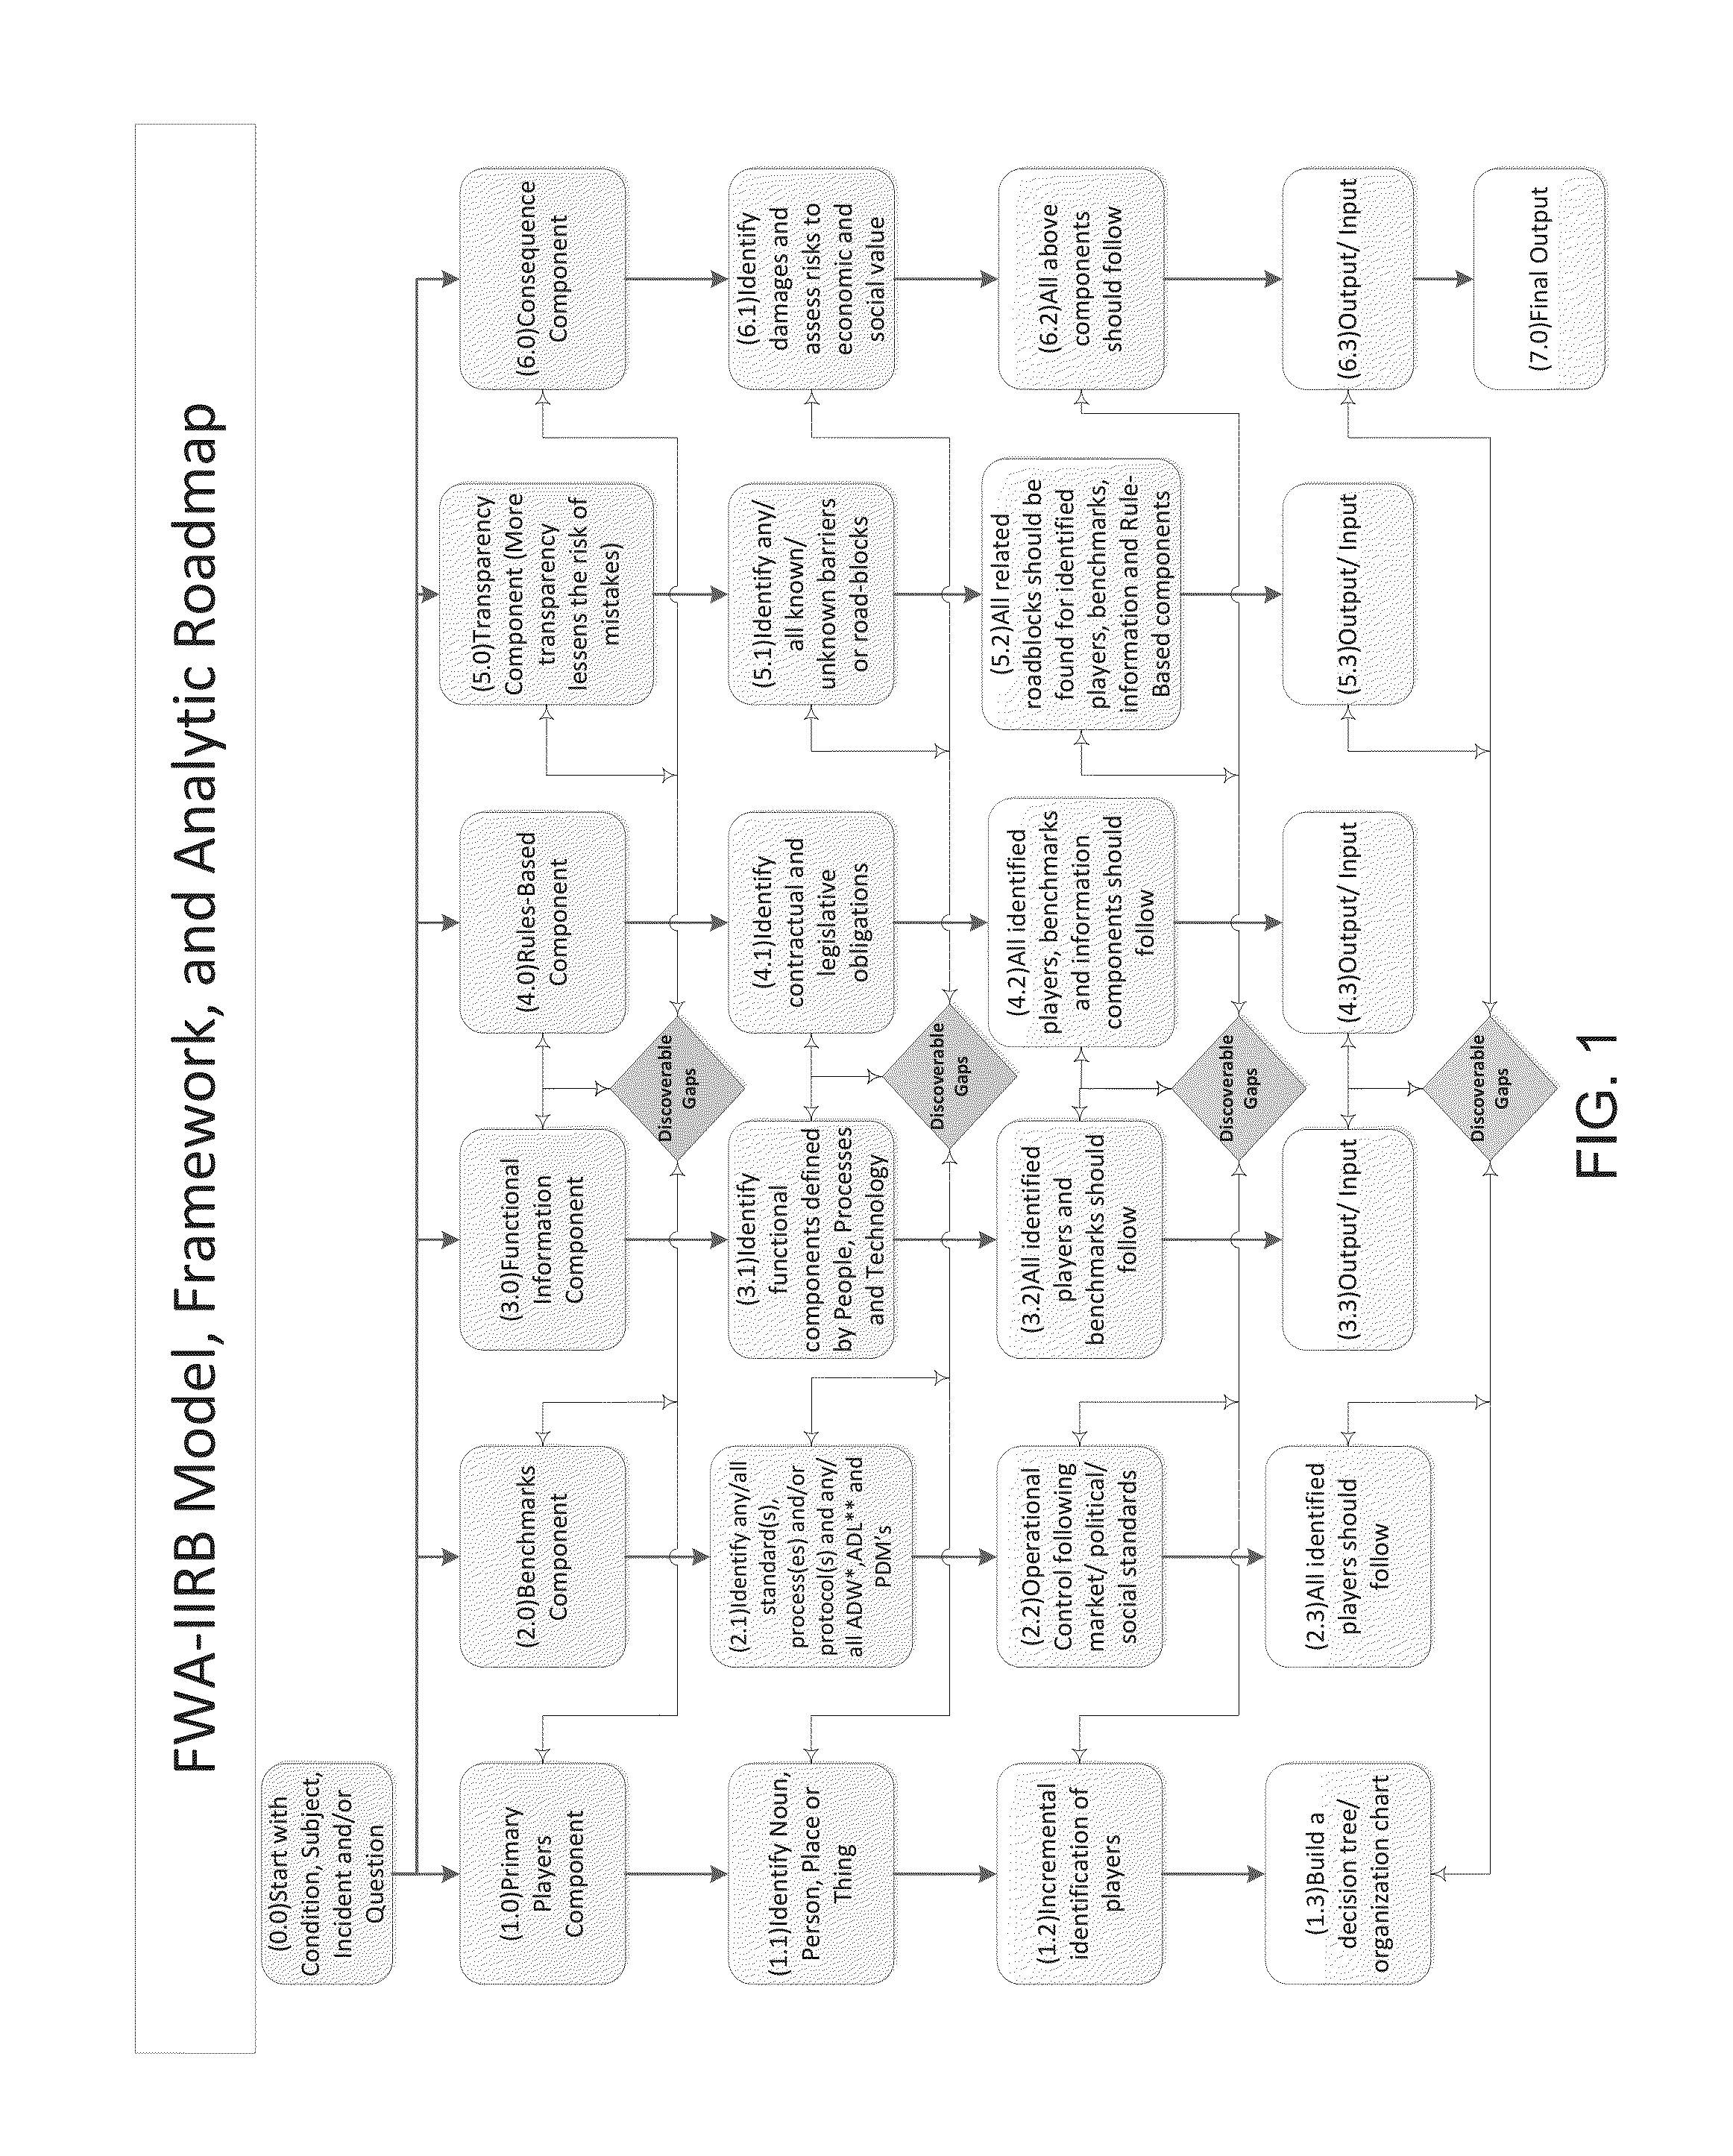 Interactive and Iterative Behavioral Model, System, and Method for Detecting Fraud, Waste, and Abuse